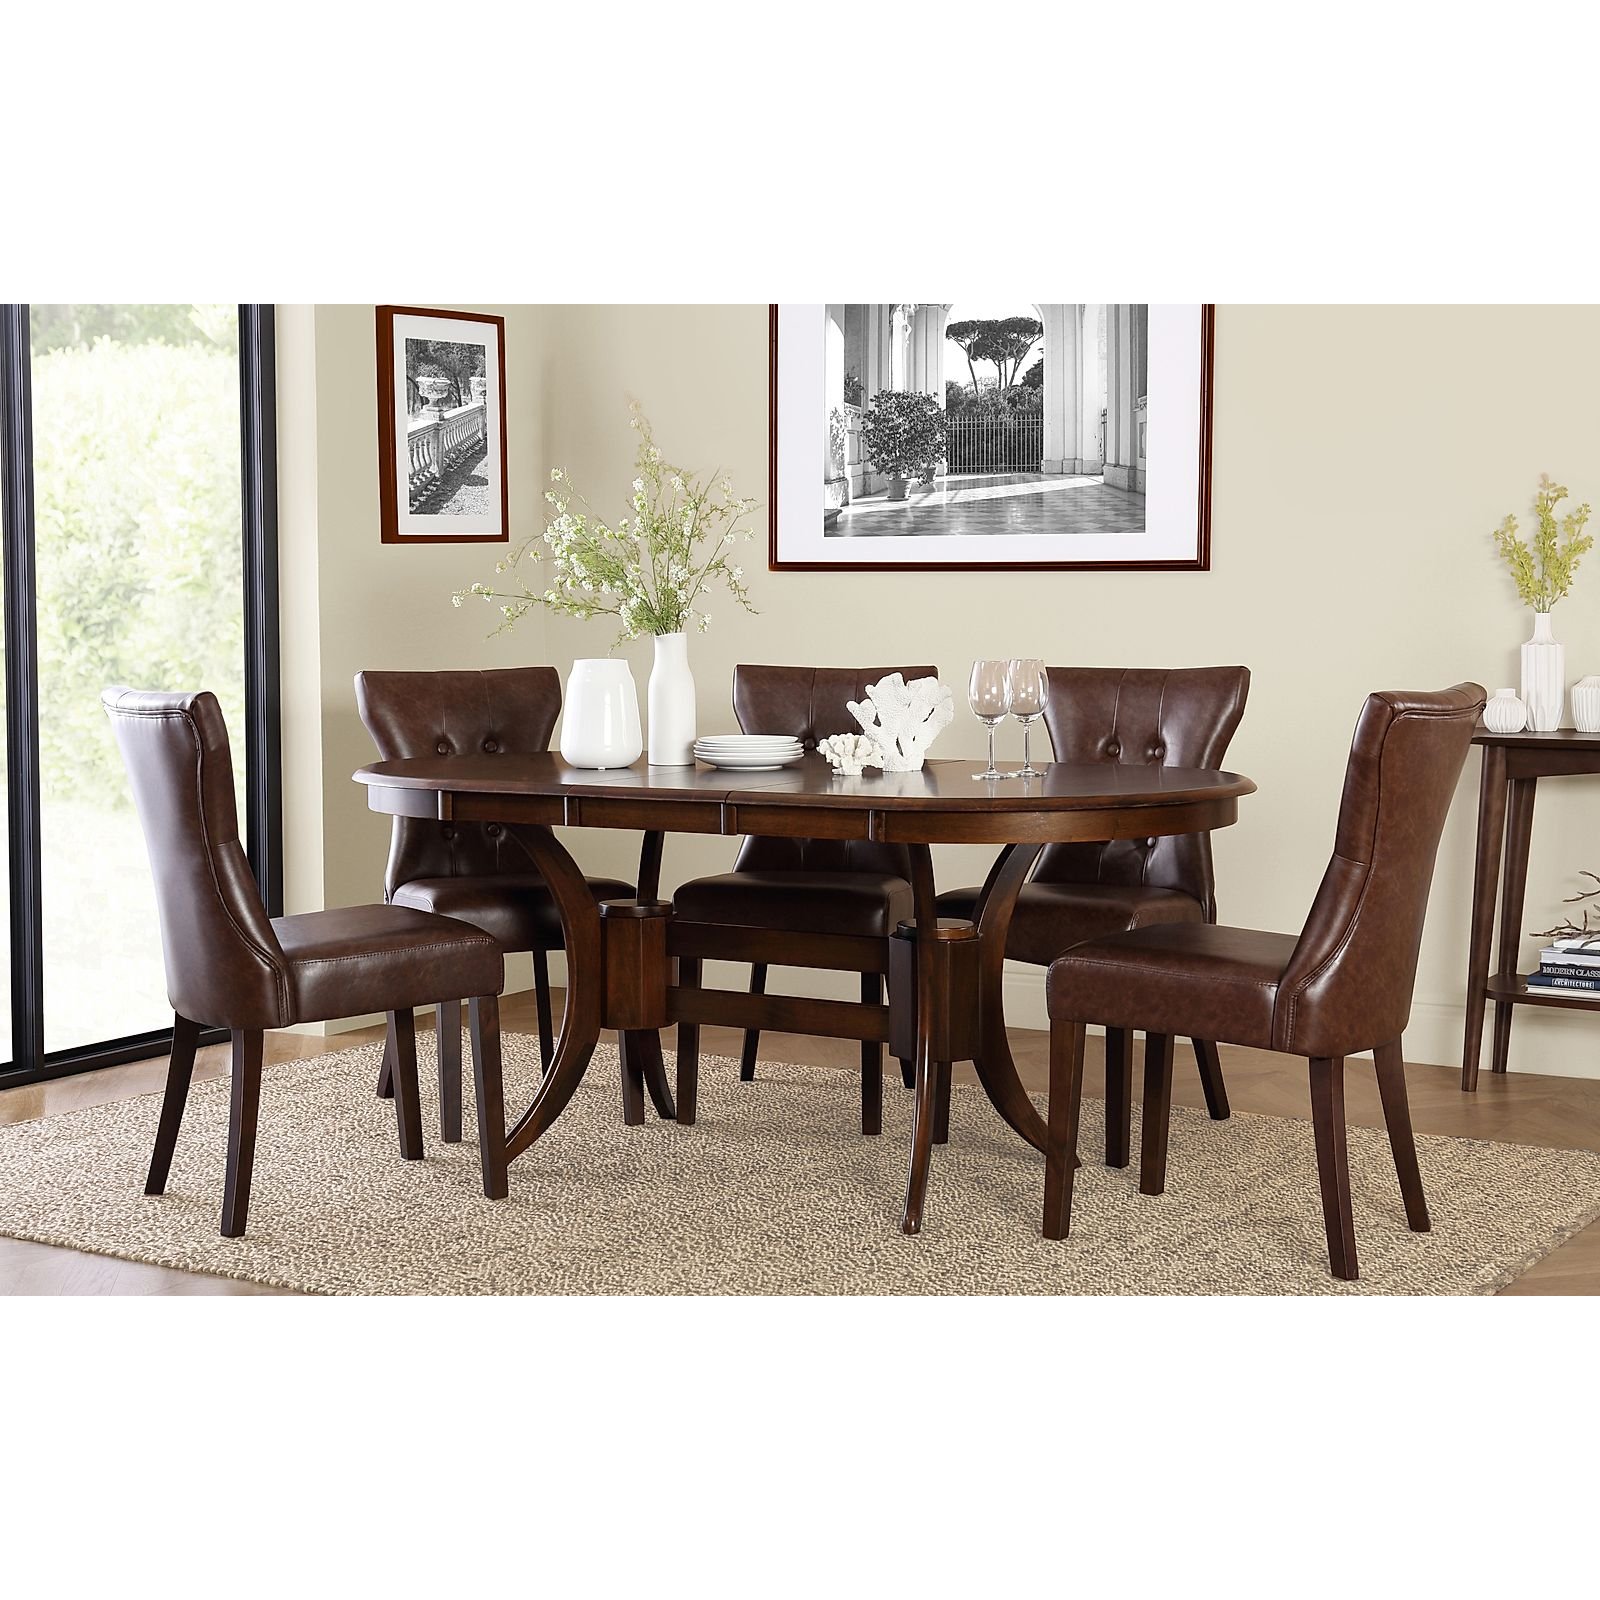 Townhouse Oval Dark Wood Extending Dining Table with 4 Bewley Club Brown Leather Chairs